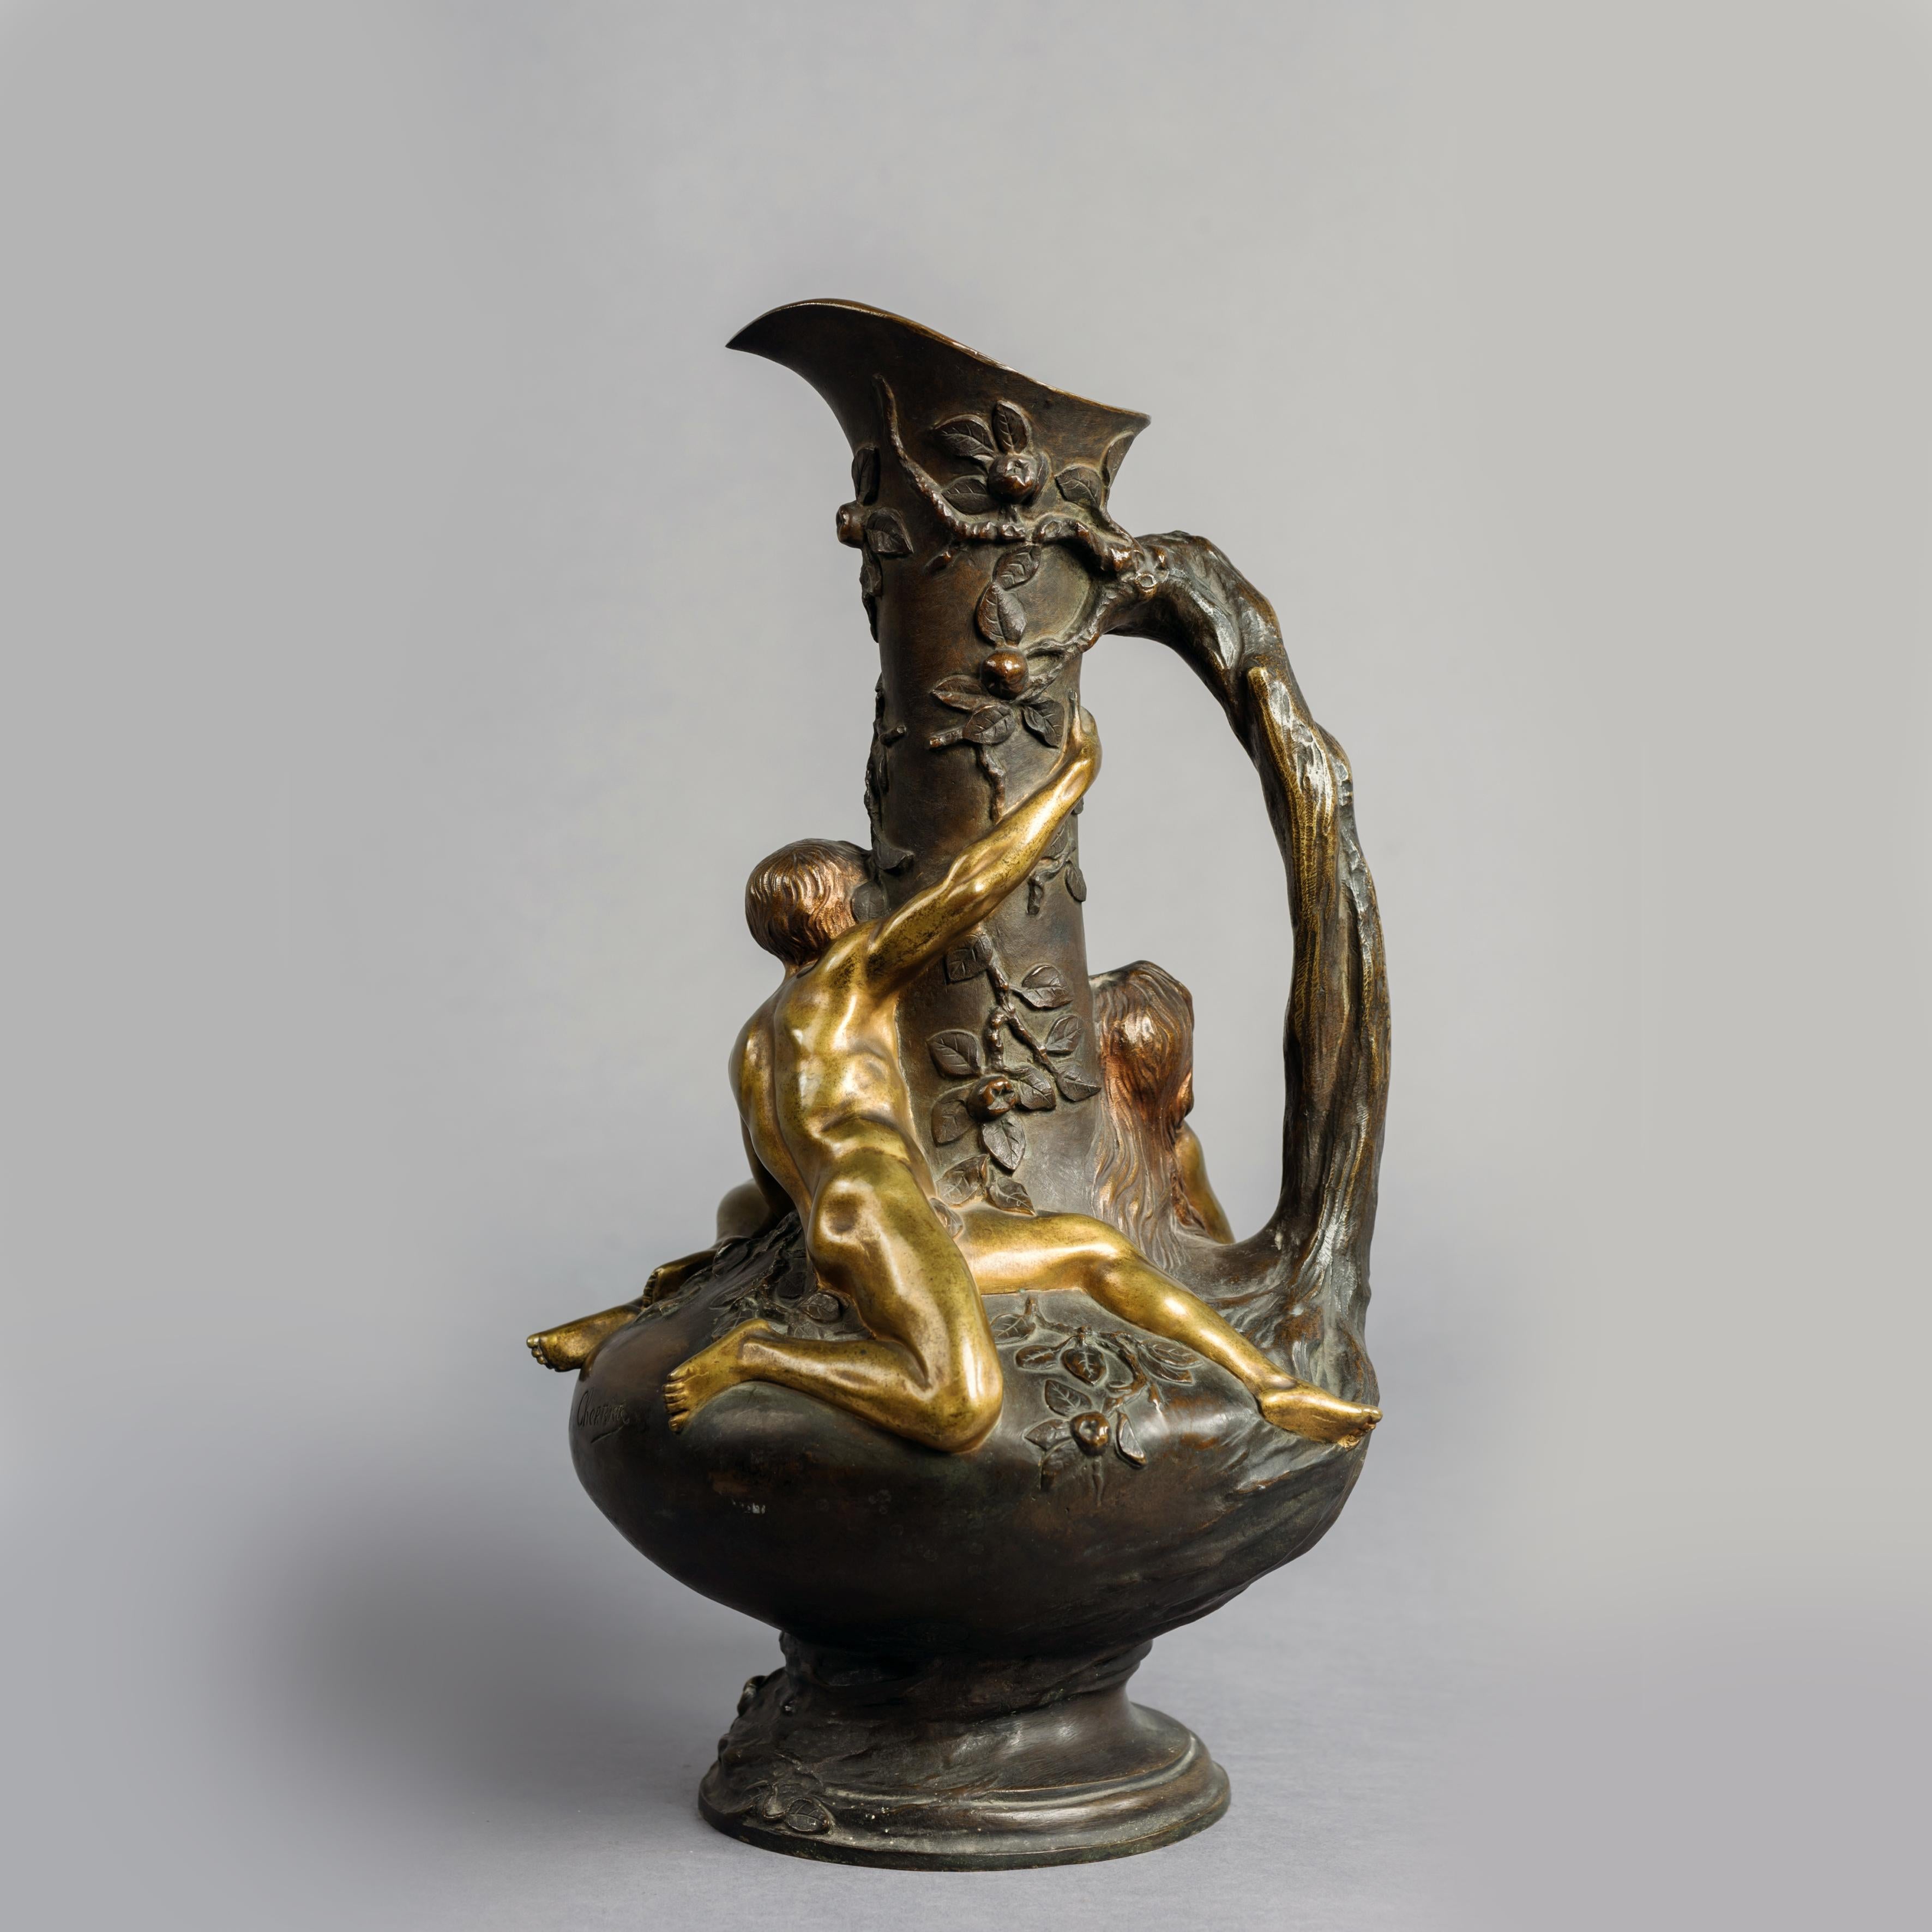 'The Temptation' by Eugene-Victor Cherrier.

A fine patinated bronze ewer modeled in high relief depicting Adam and Eve in the Garden of Eden.

Signed to the bronze body 'Victor Cherrier' for Eugène-Victor Cherrier.

Eugène-Victor Cherrier,